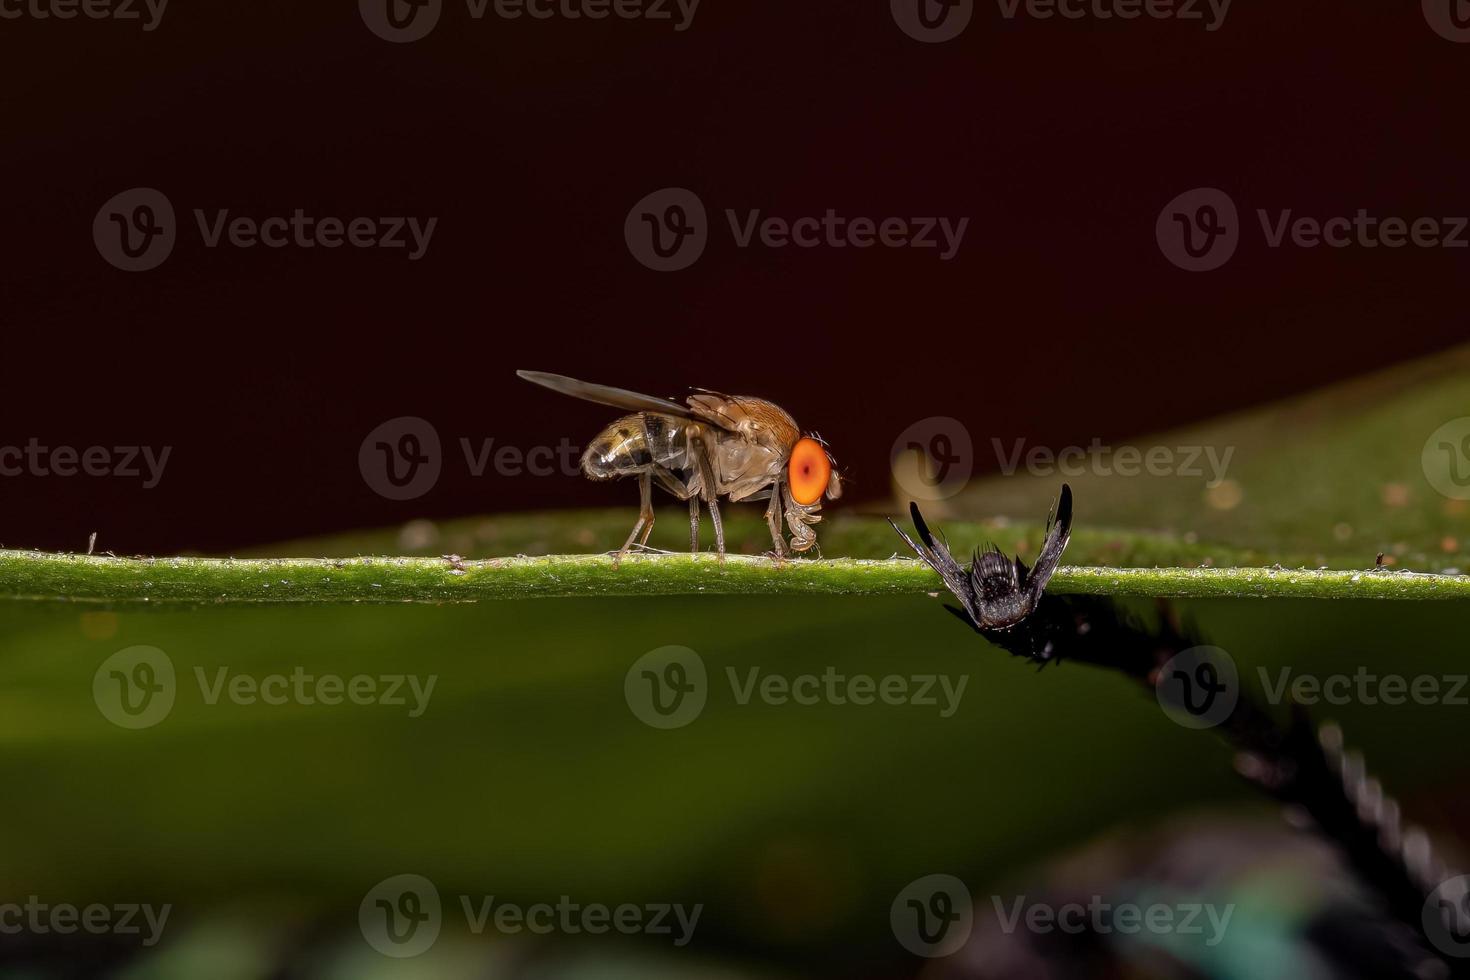 Adult Small Fruit Fly photo